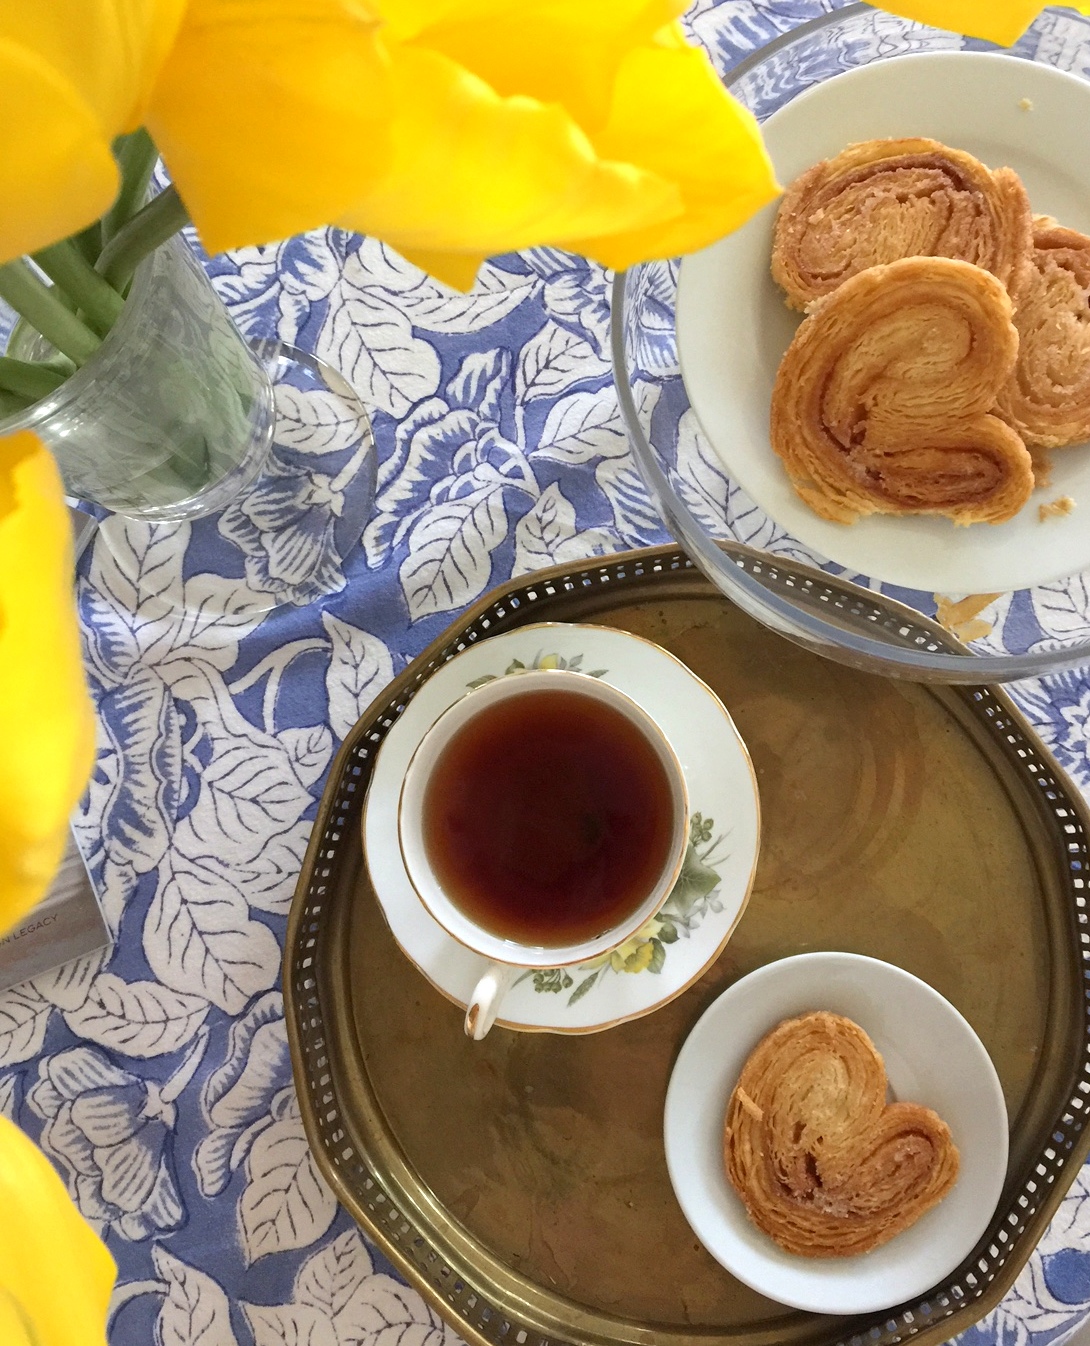 Palmiers: A Simple French Treat